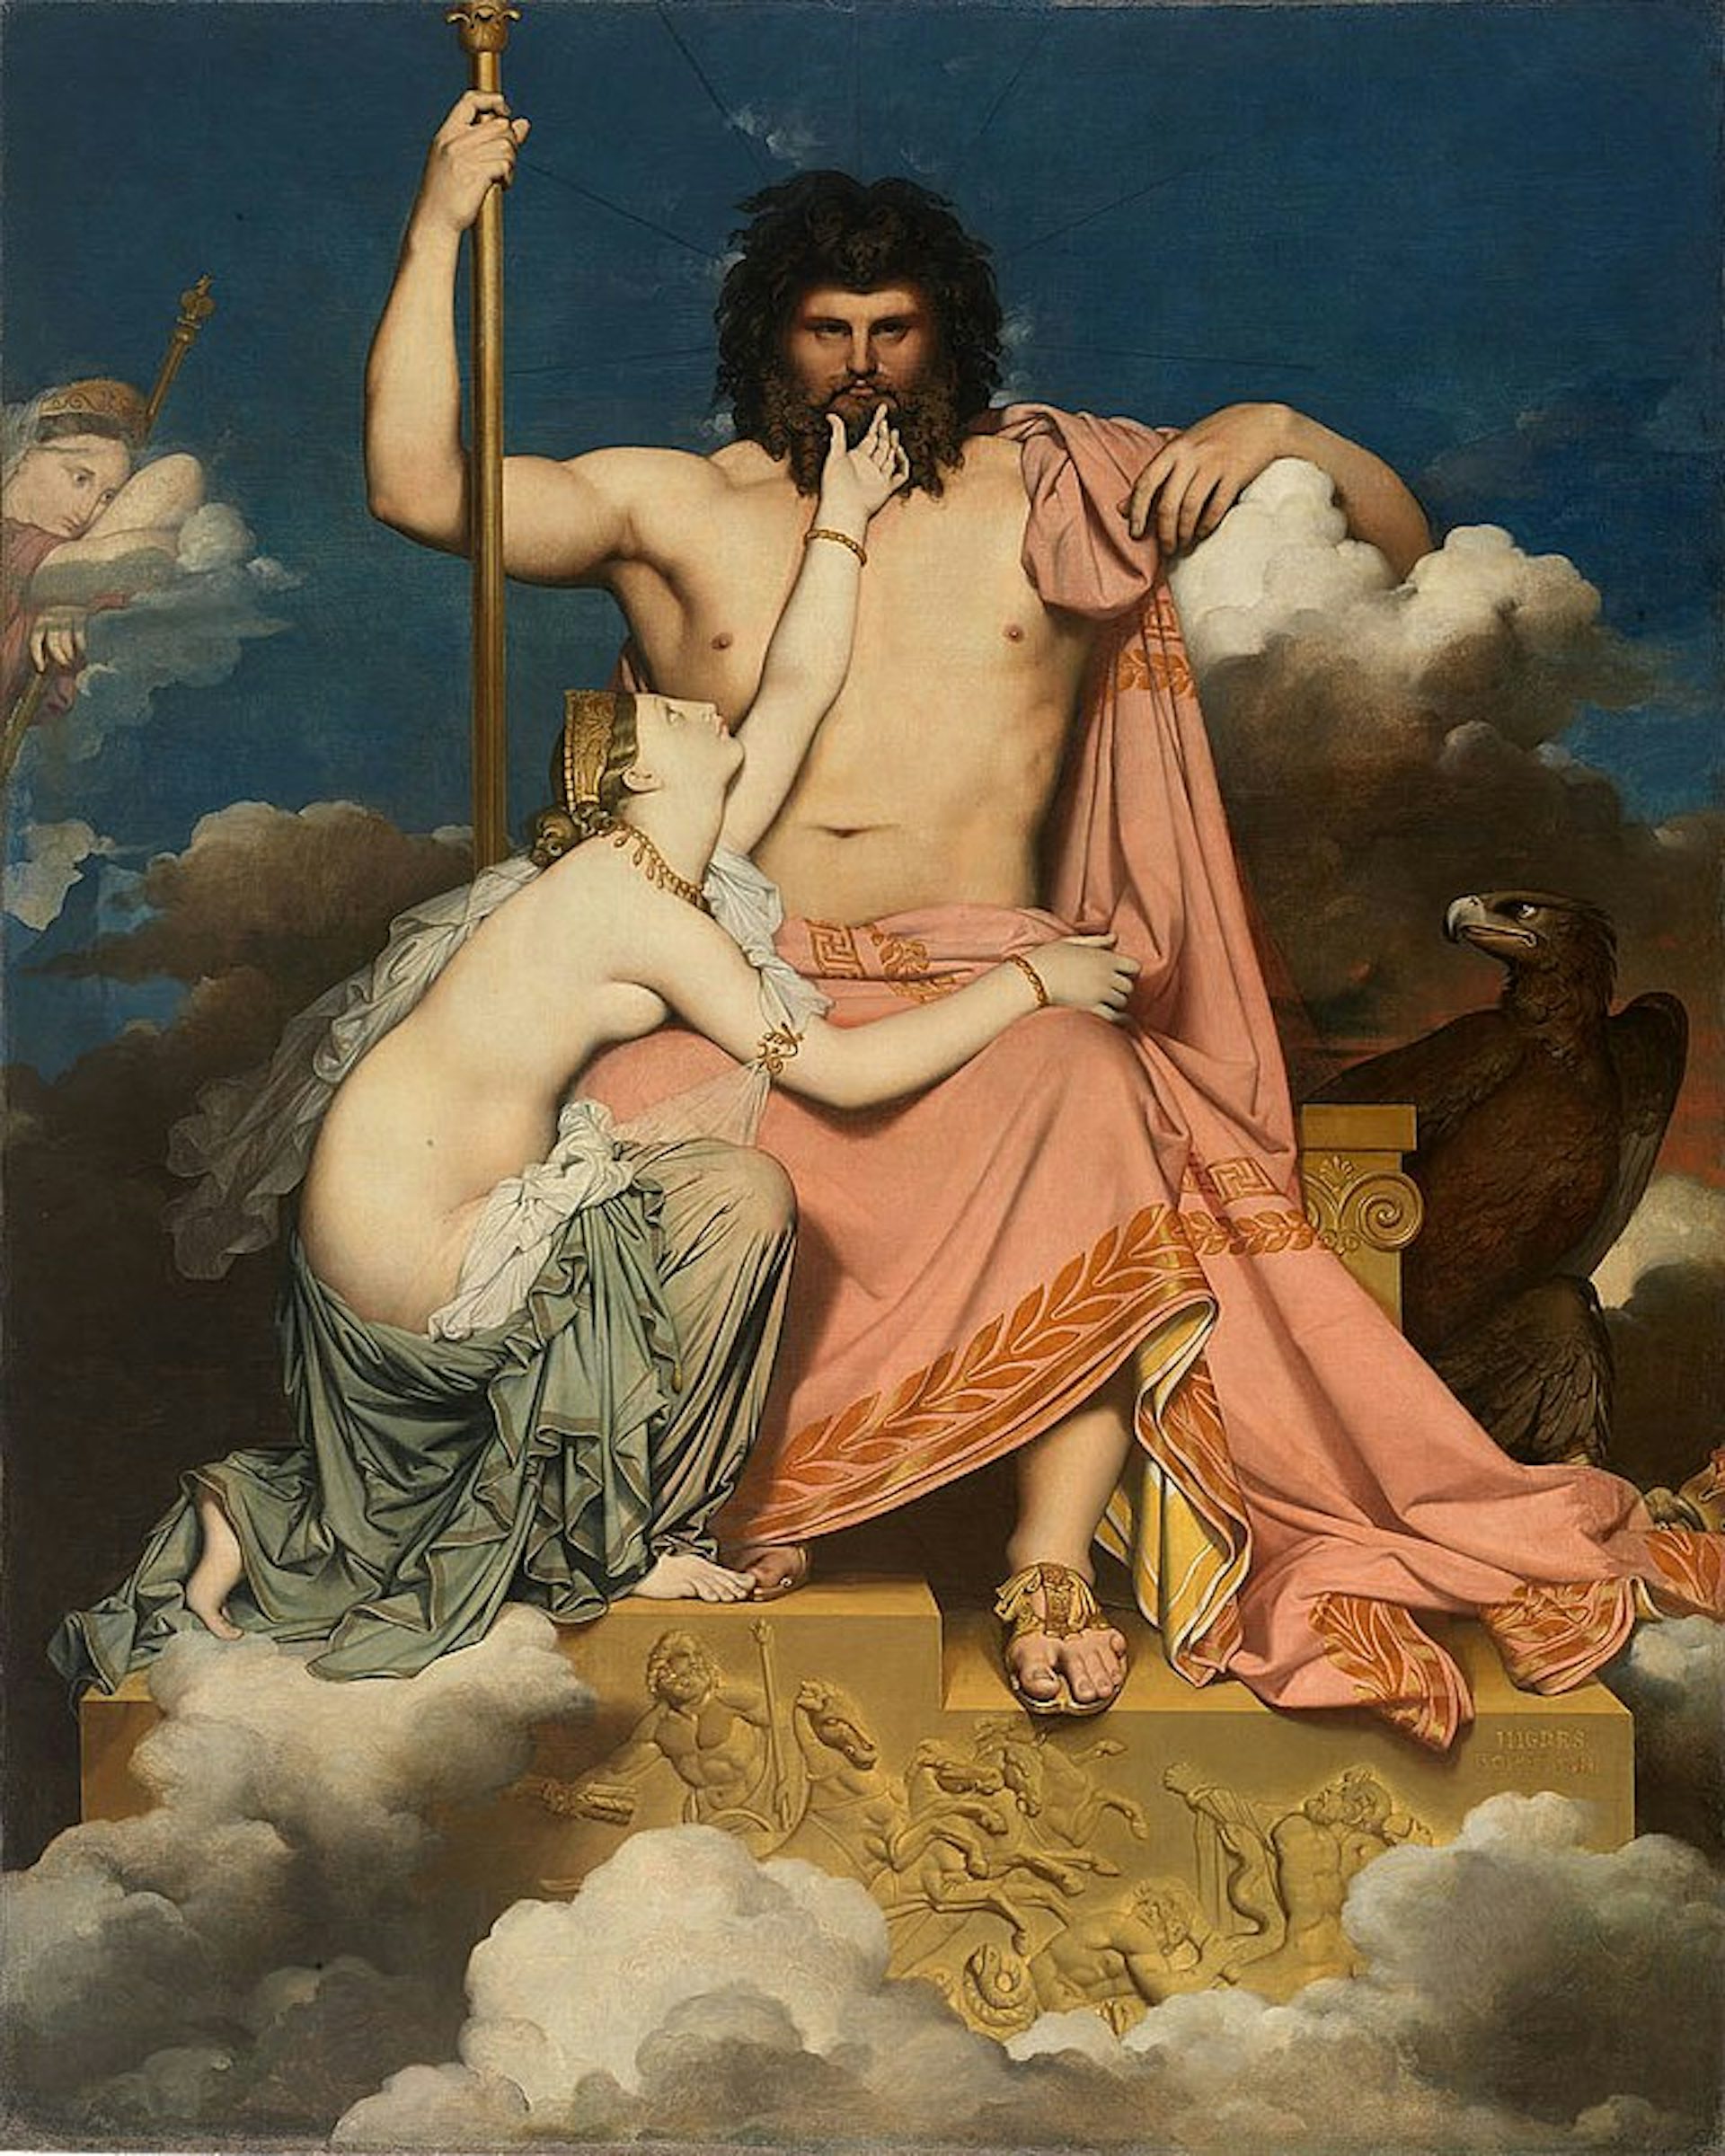 Jupiter and Thetis by Jean-Auguste-Dominique Ingres